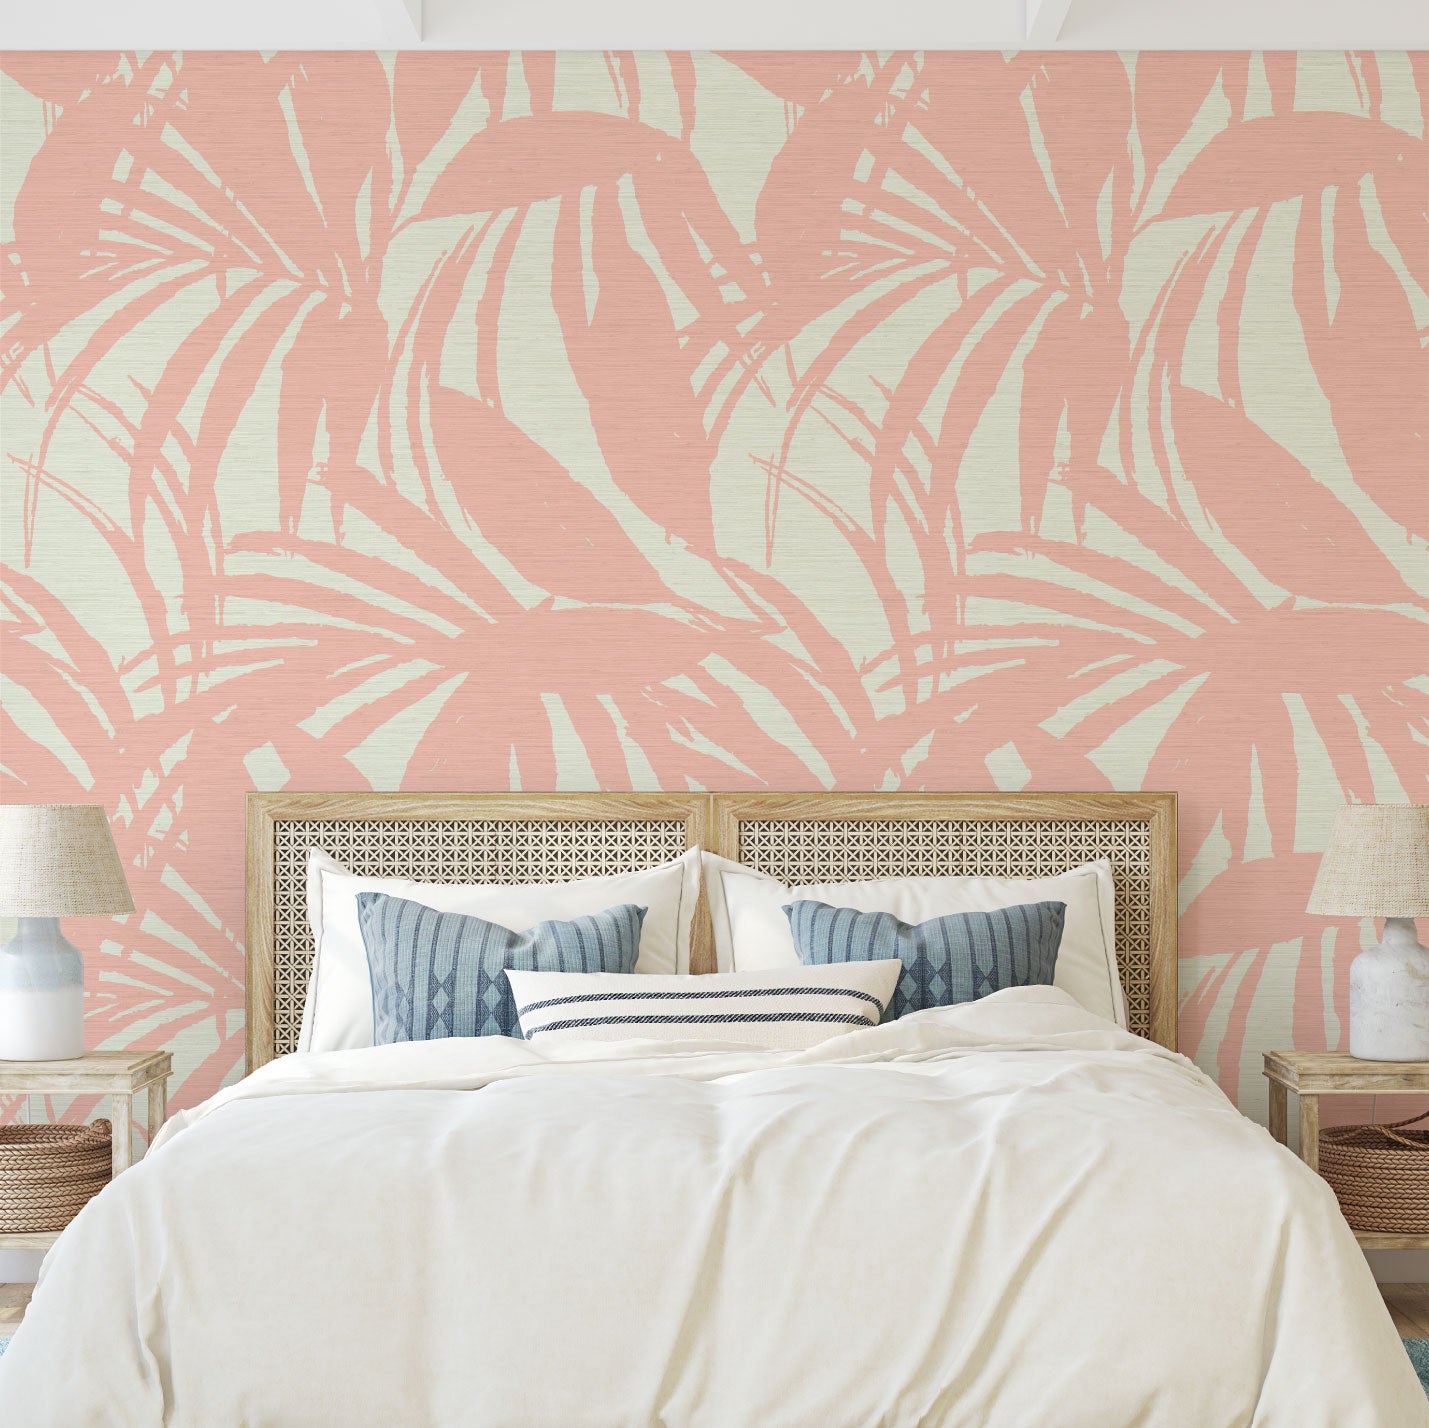 printed grasscloth wallpaper oversize tropical leaf Natural Textured Eco-Friendly Non-toxic High-quality  Sustainable practices Sustainability Interior Design Wall covering Bold retro chic custom jungle garden botanical Seaside Coastal Seashore Waterfront Vacation home styling Retreat Relaxed beach vibes Beach cottage Shoreline Oceanfront white peach pink coral pastel baby orange bedroom